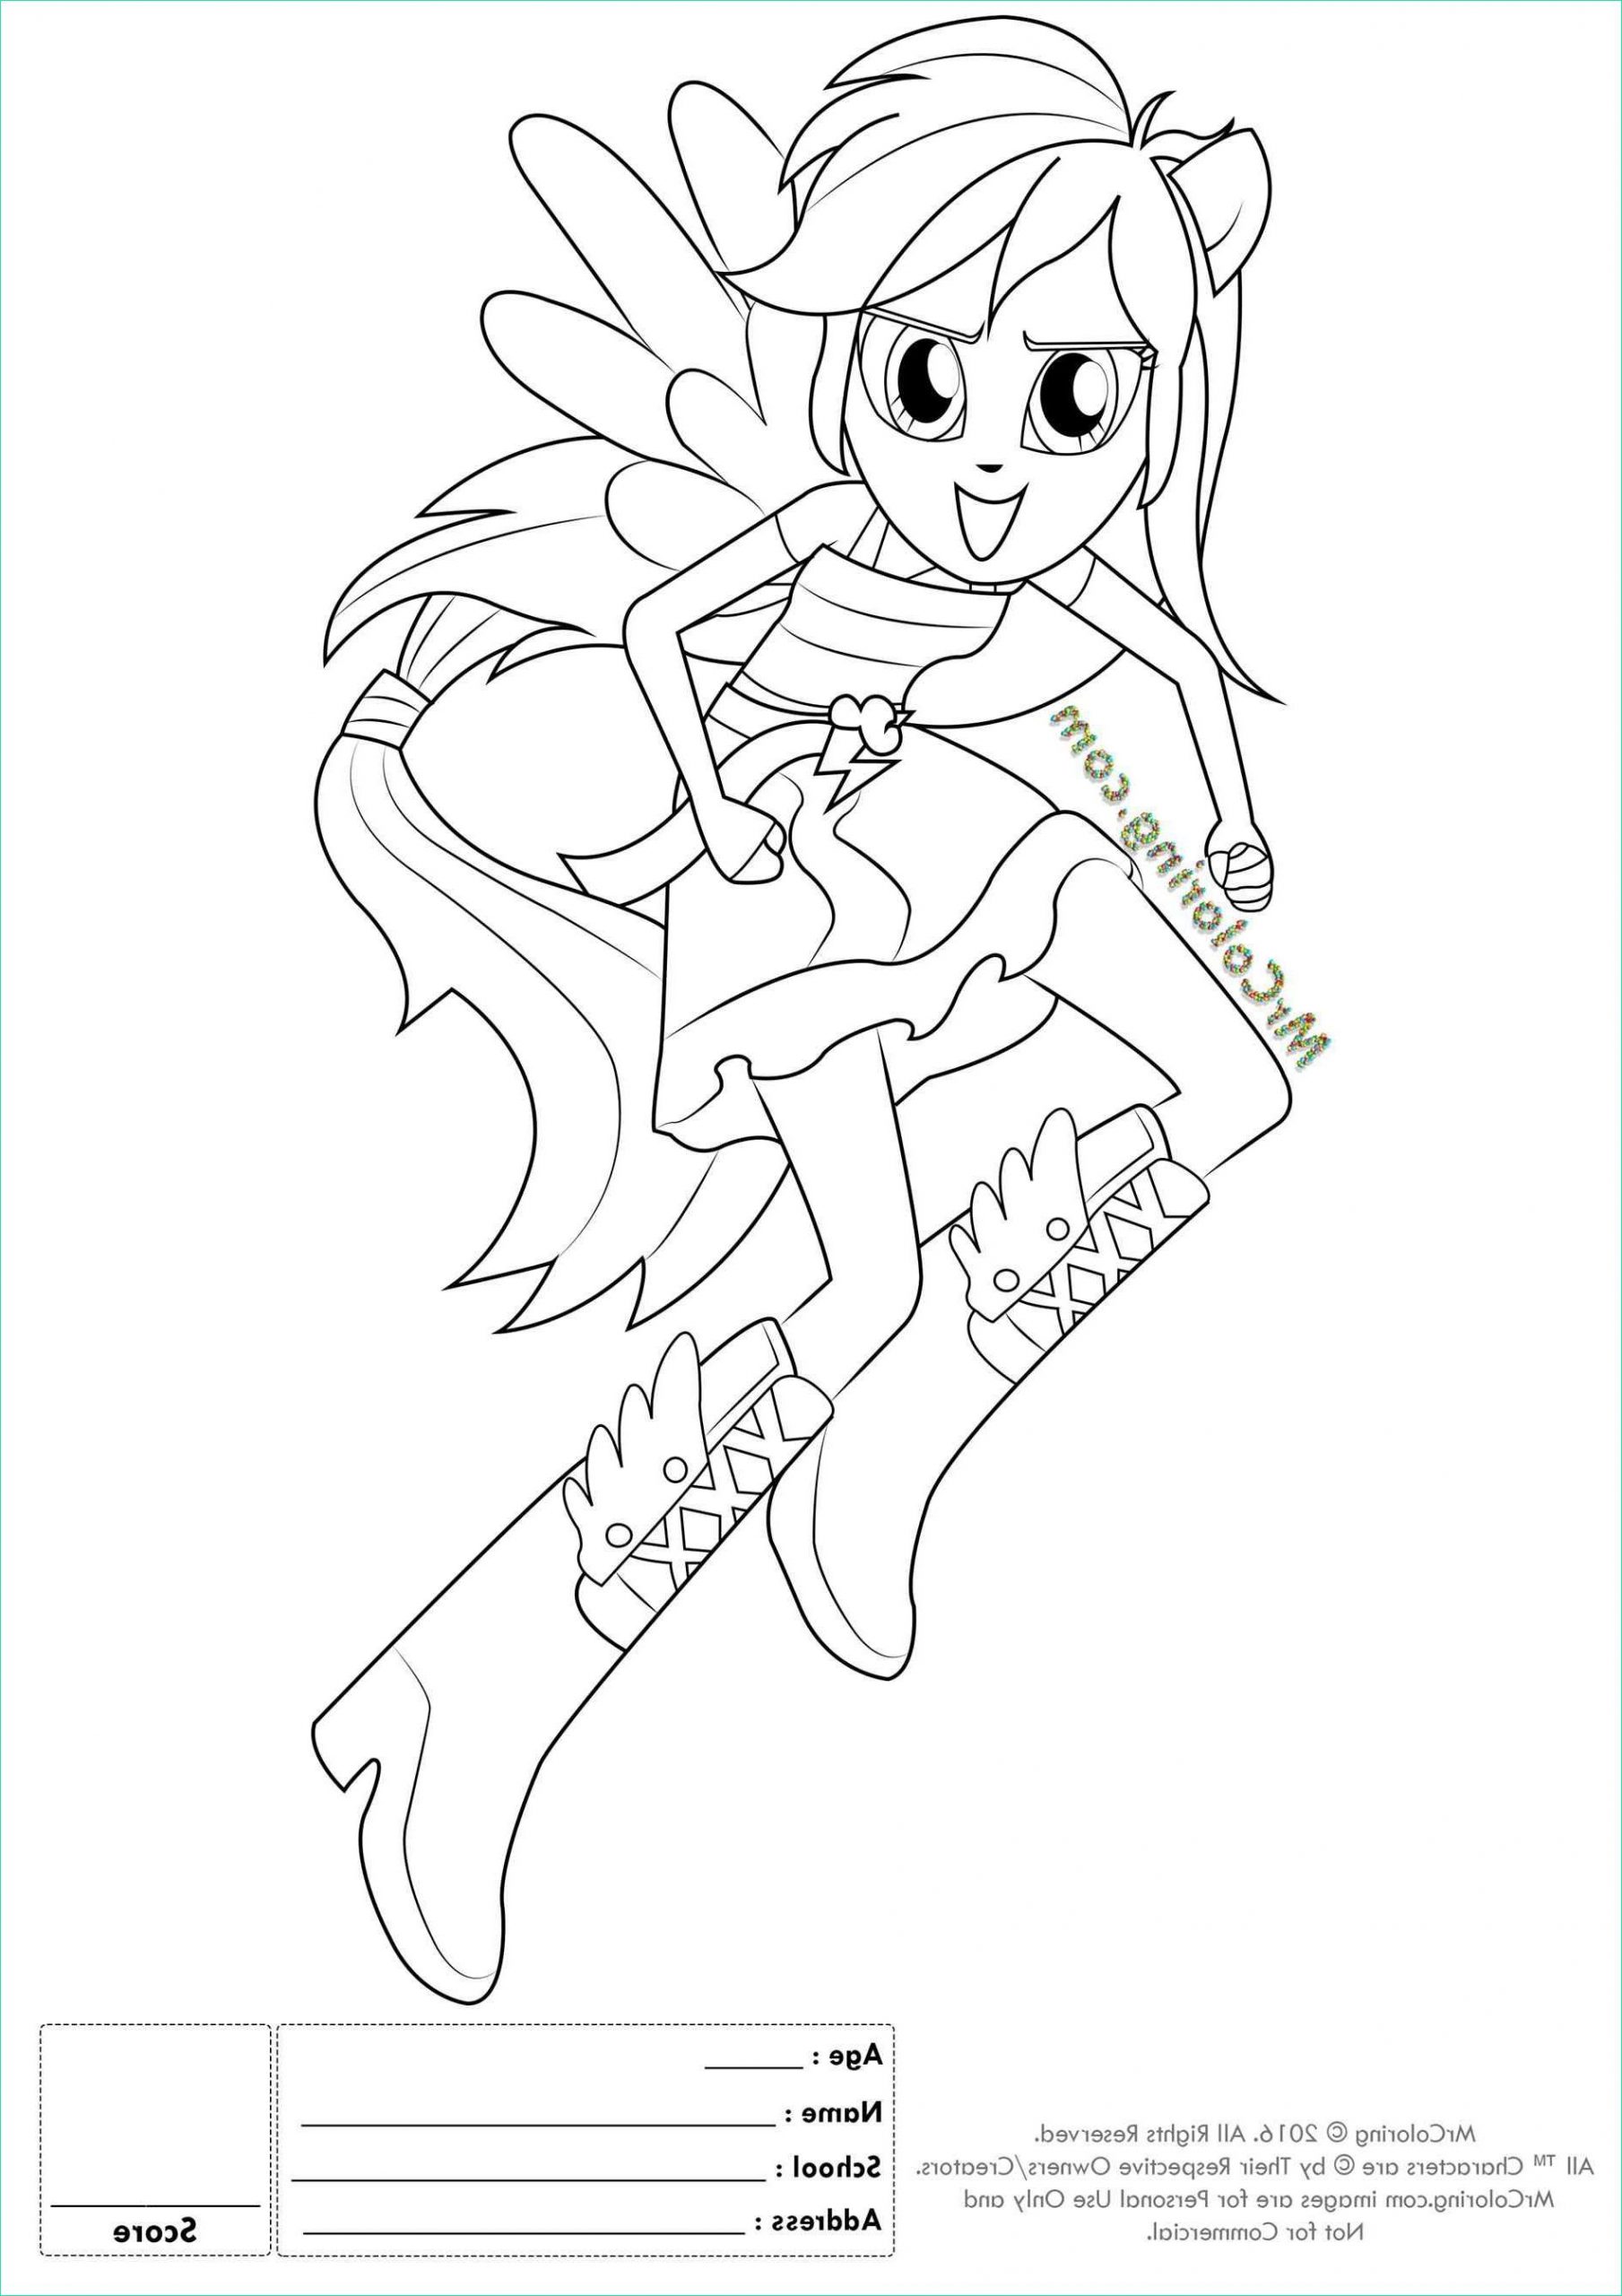 equestria girl coloring pages to print